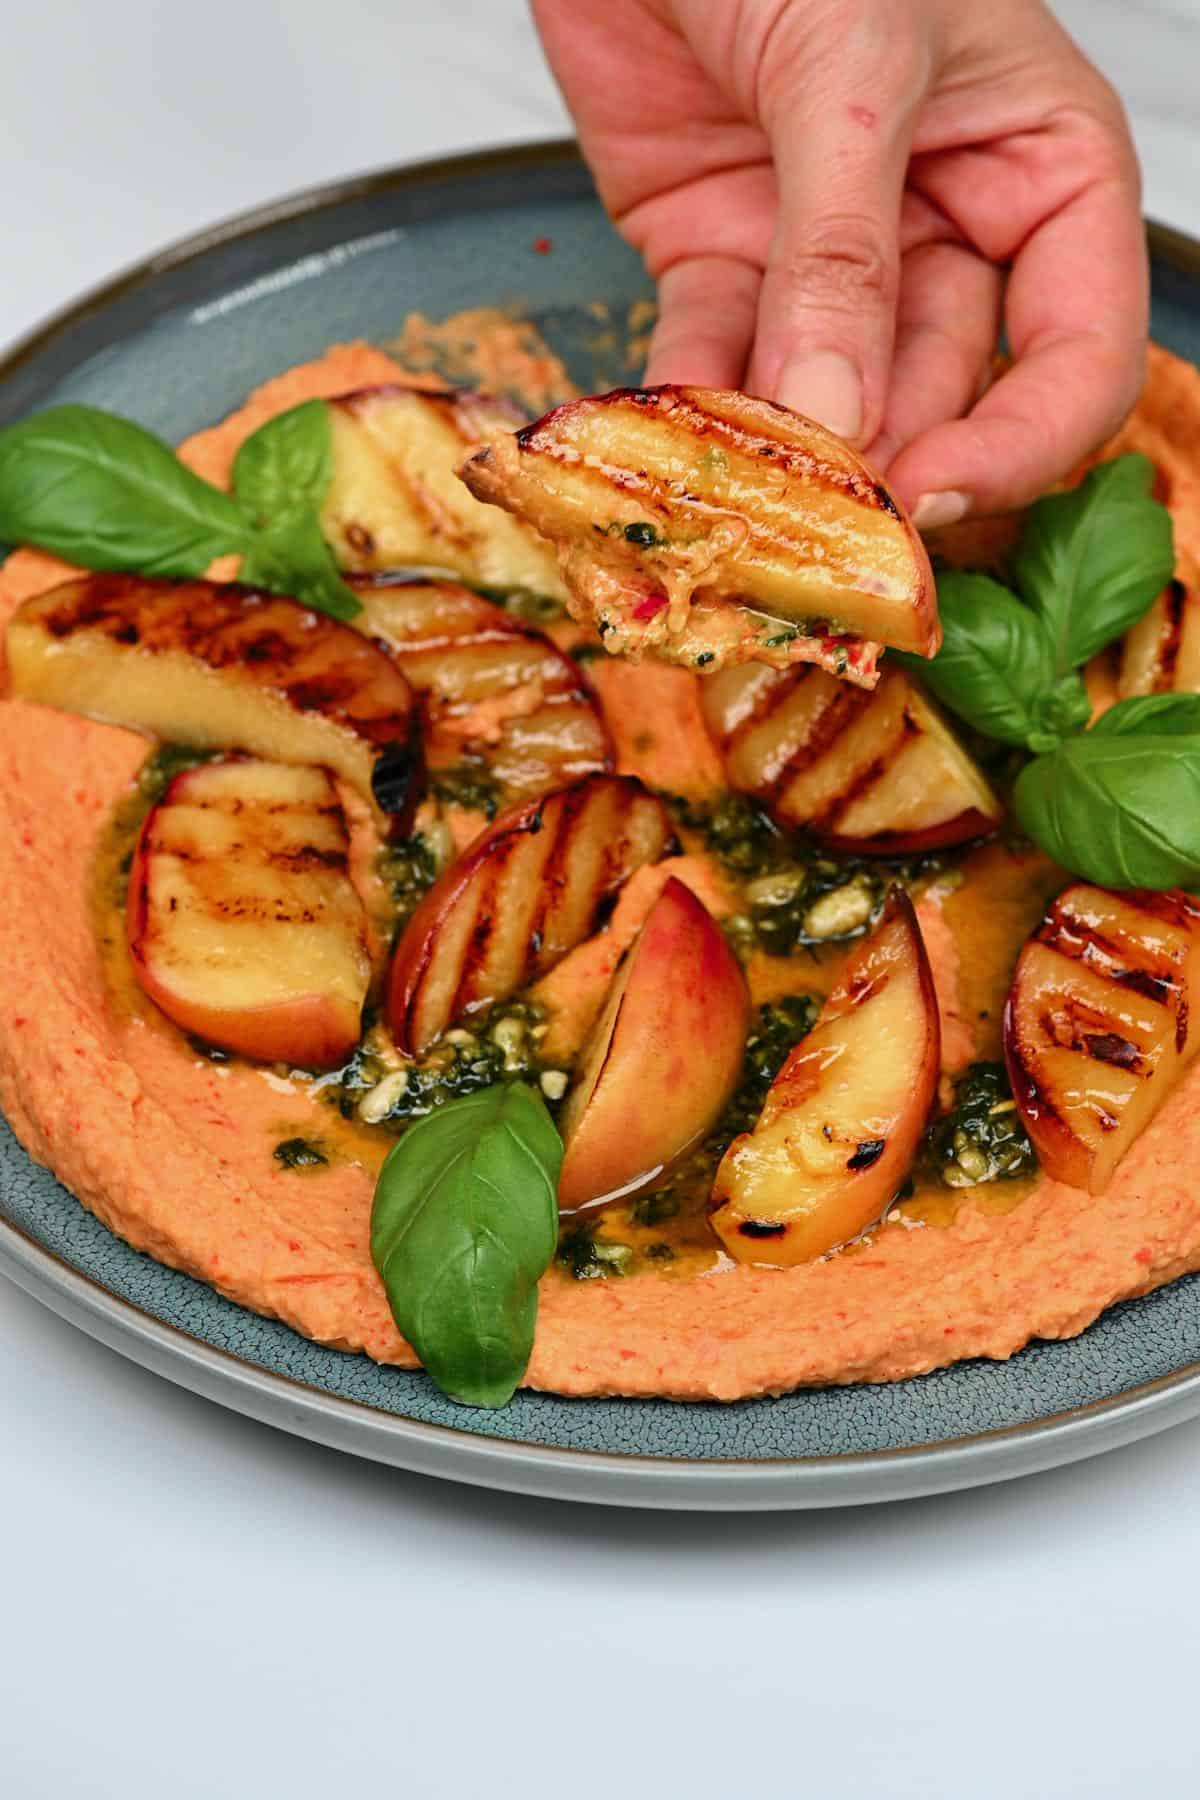 Grilled peach with roasted red pepper hummus